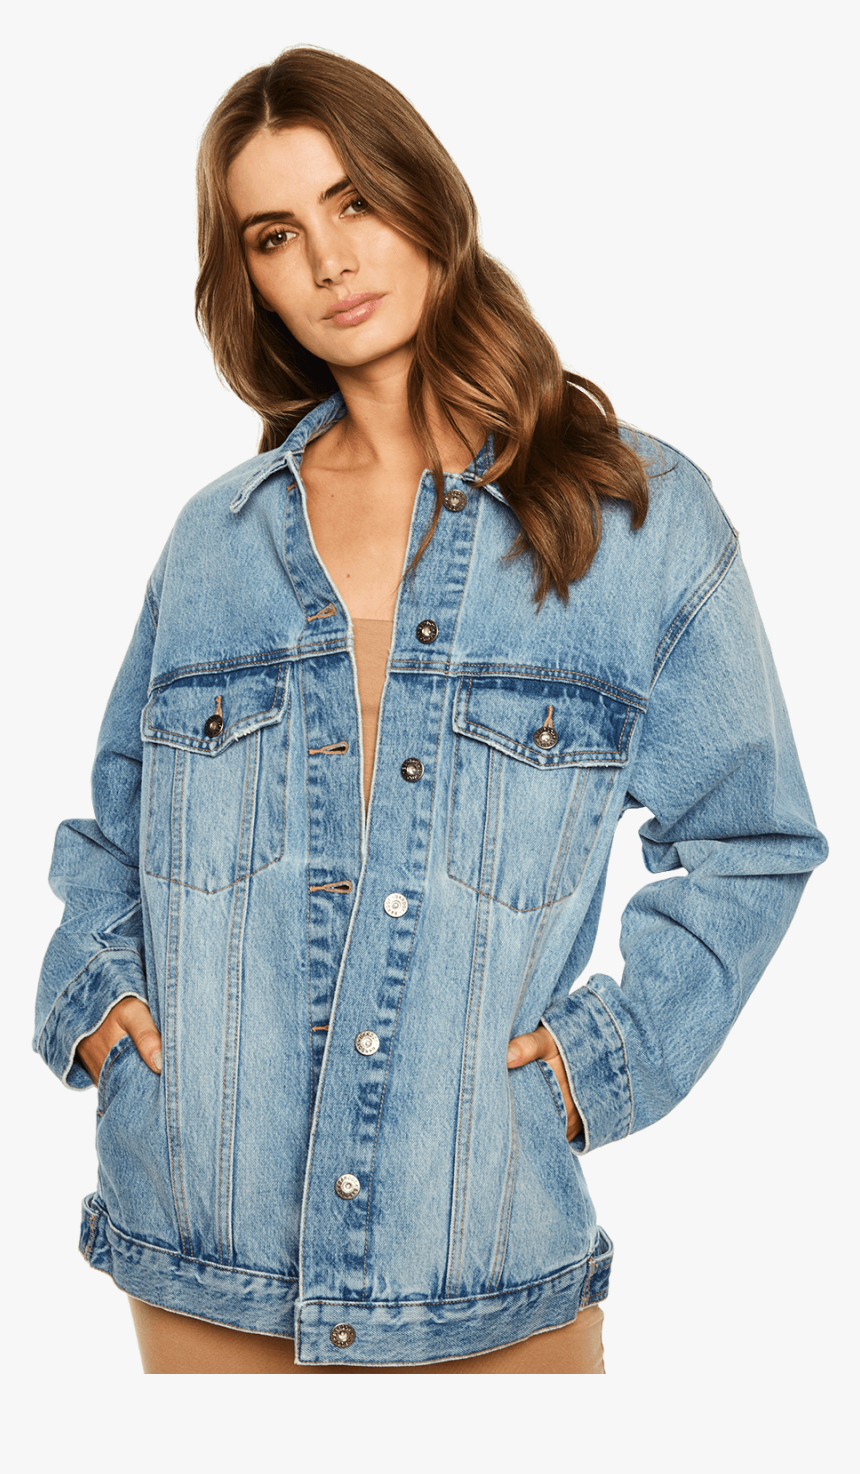 Kylie Denim Jacket In Colour Citadel - Photo Shoot, HD Png Download, Free Download